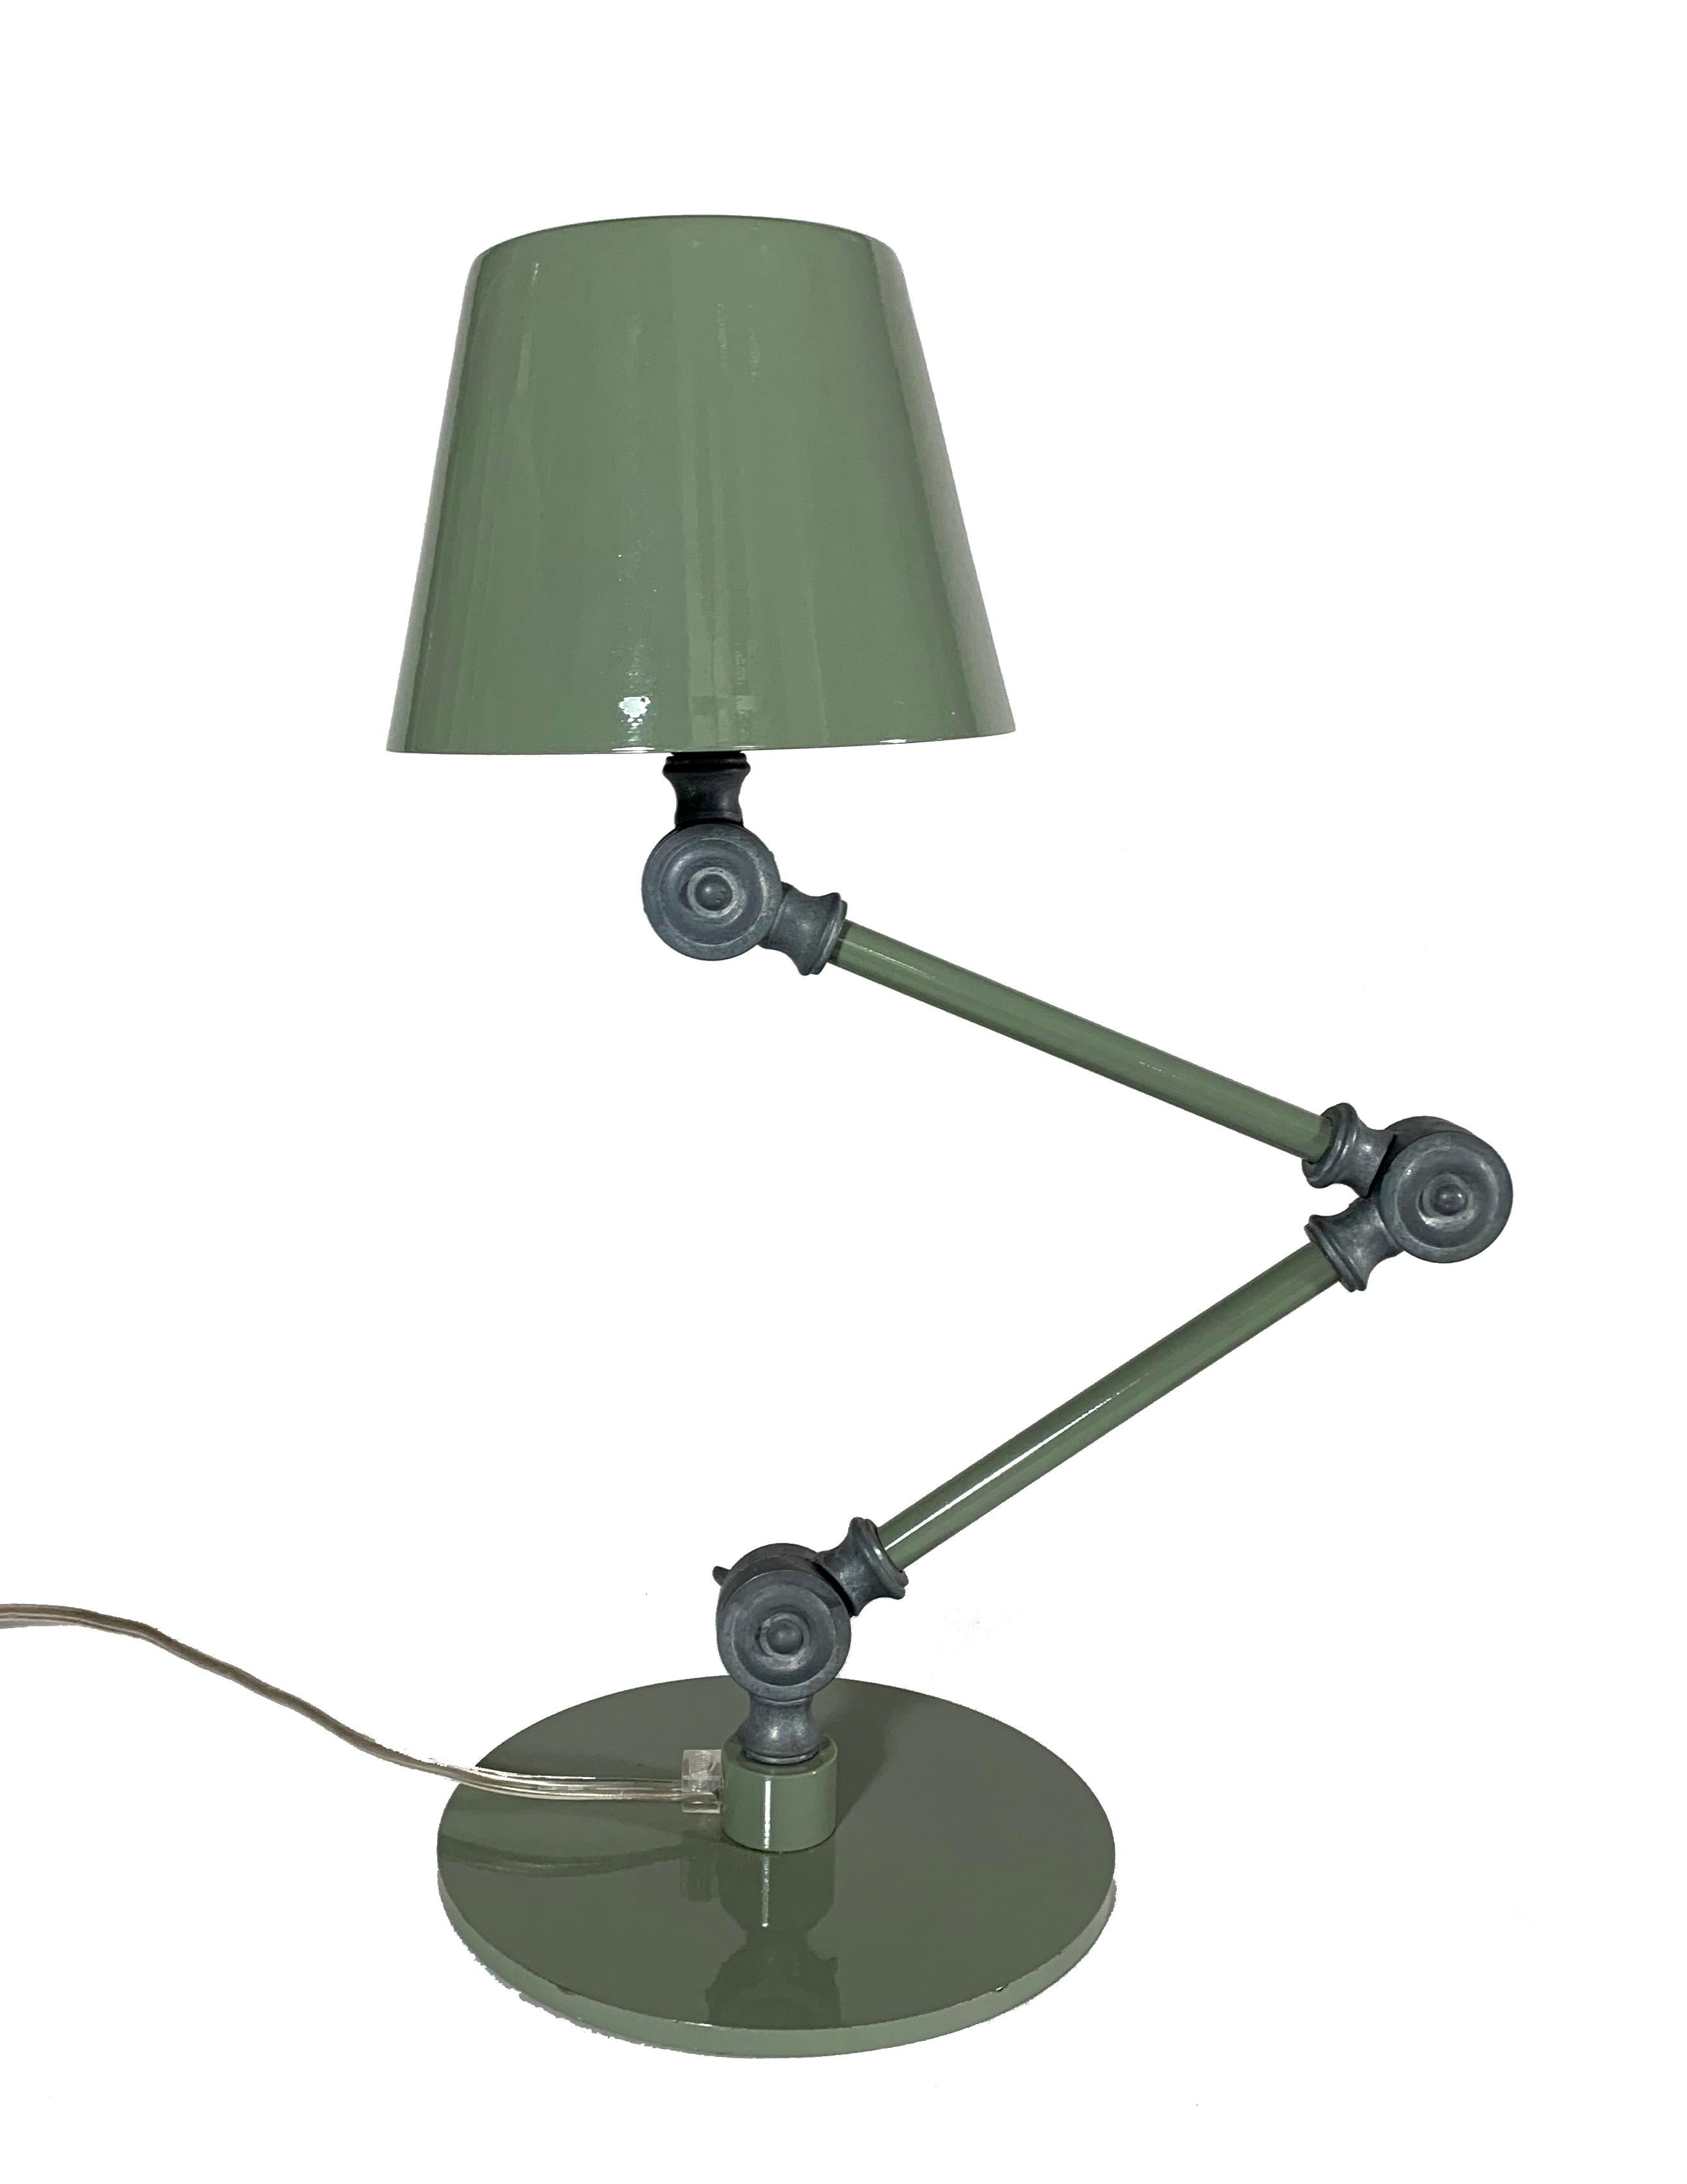 Adjustable table / accent lamp - two-section stem. Shown here in gloss military green. In-line switch on transparent cable. E14 lamp holder (bi-pin adapter available).
Made in Italy.